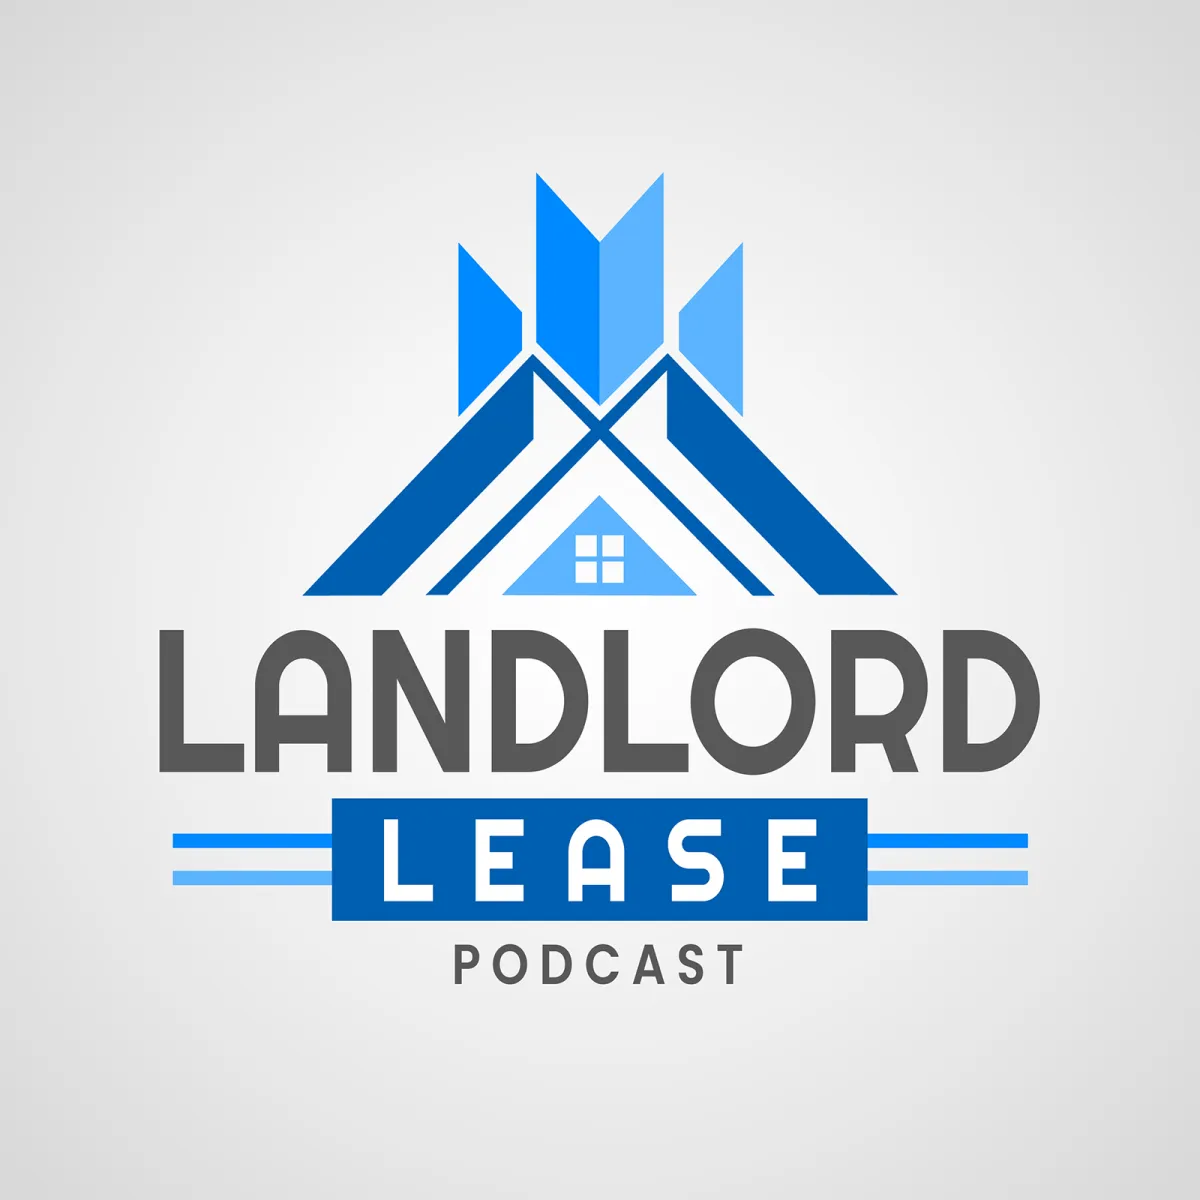 Landlord Lease Podcast